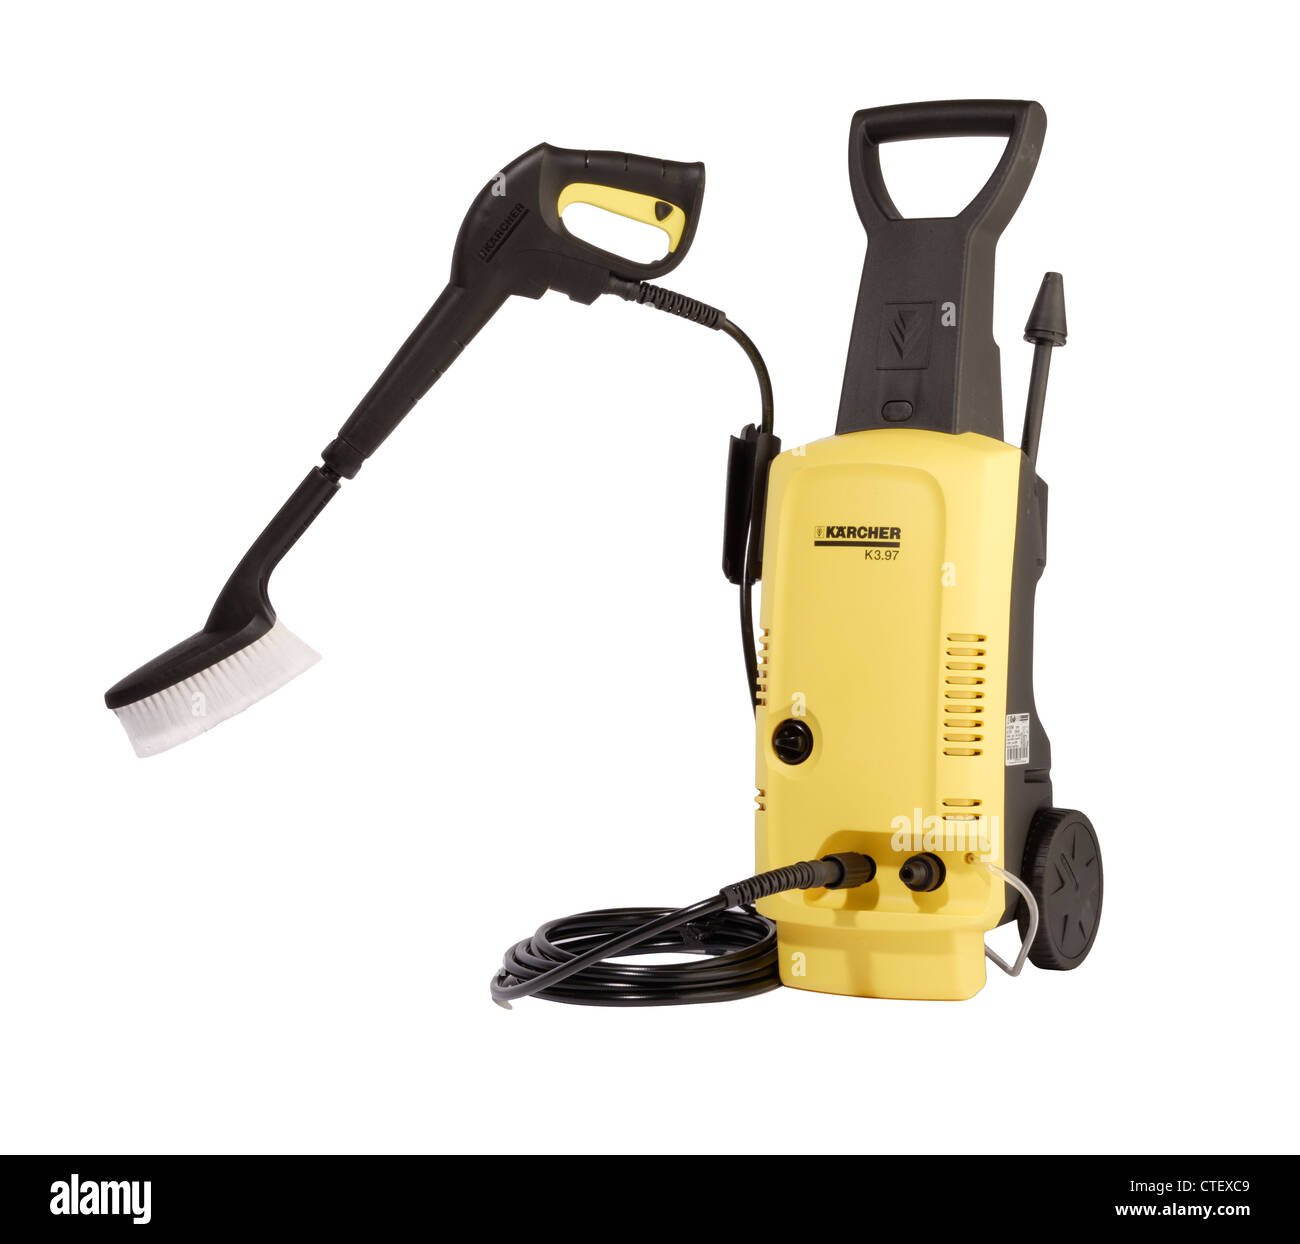 Karcher High Resolution Stock Photography and Images - Alamy